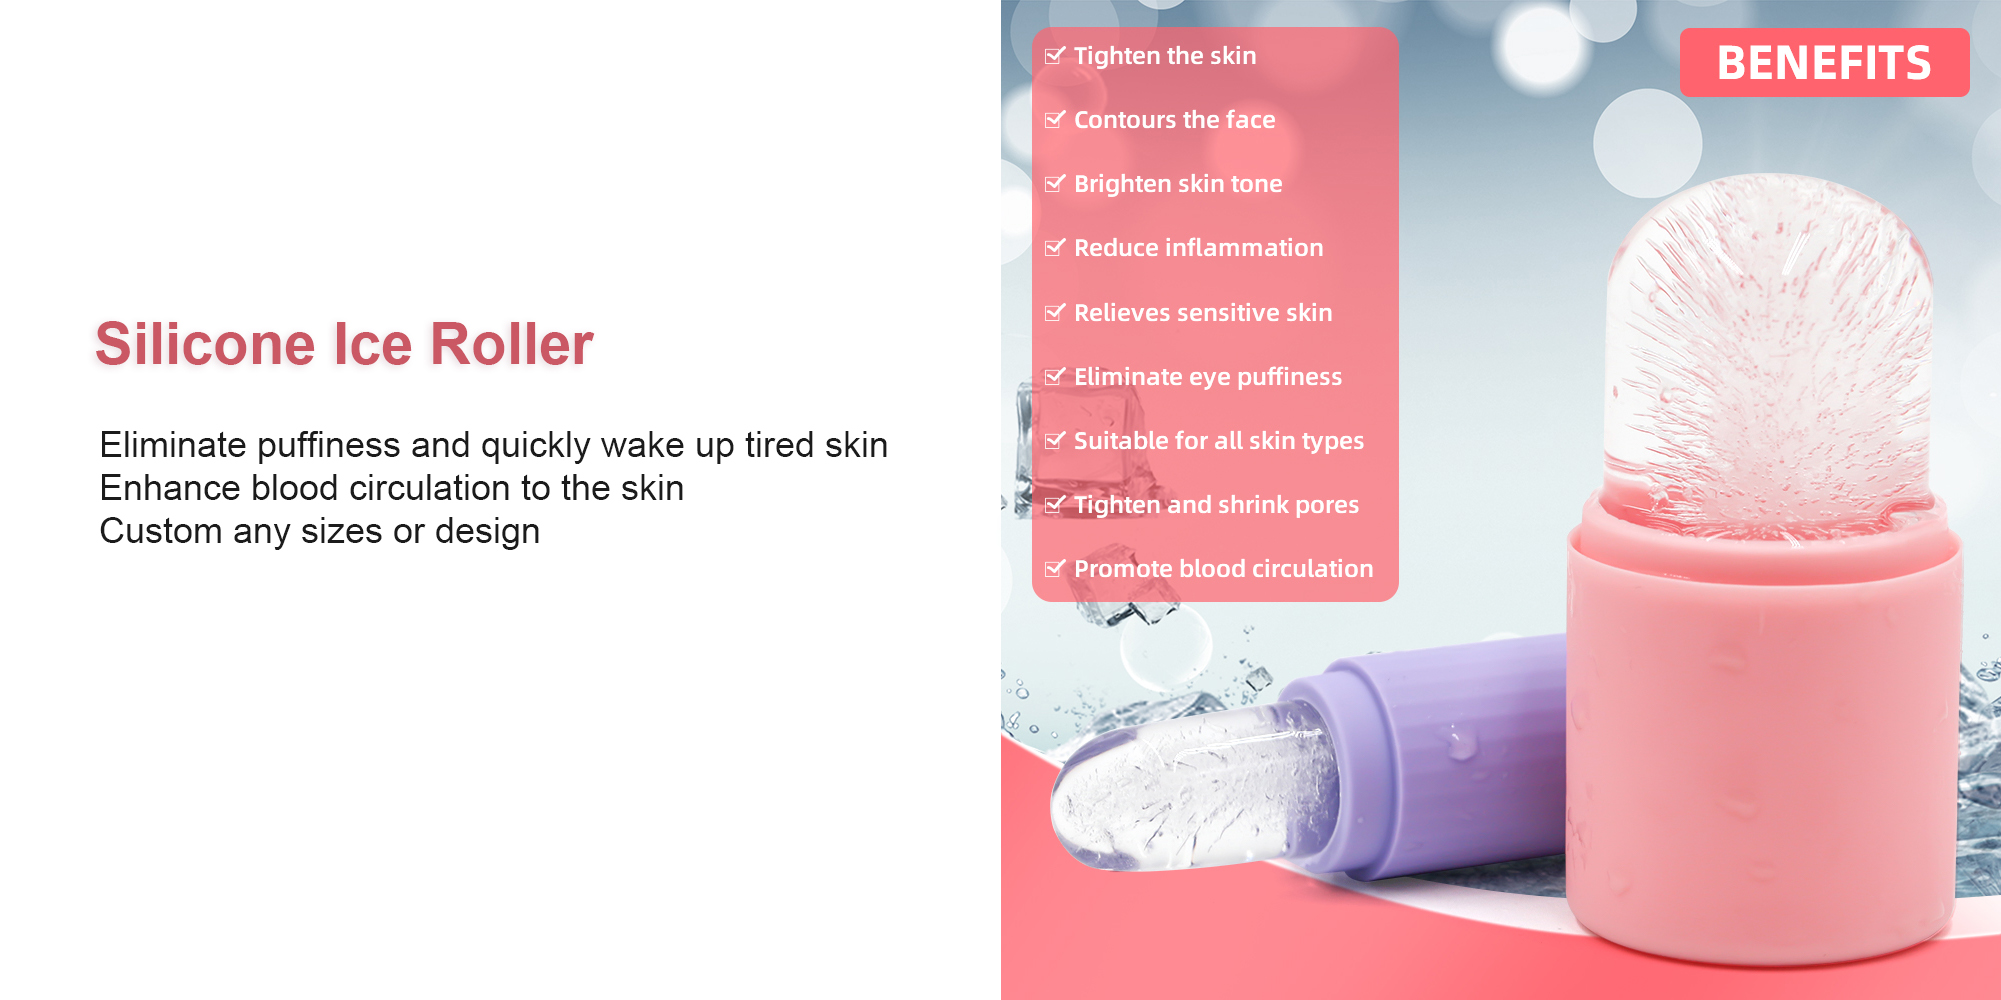 What is Facial Beauty Ice Roller?